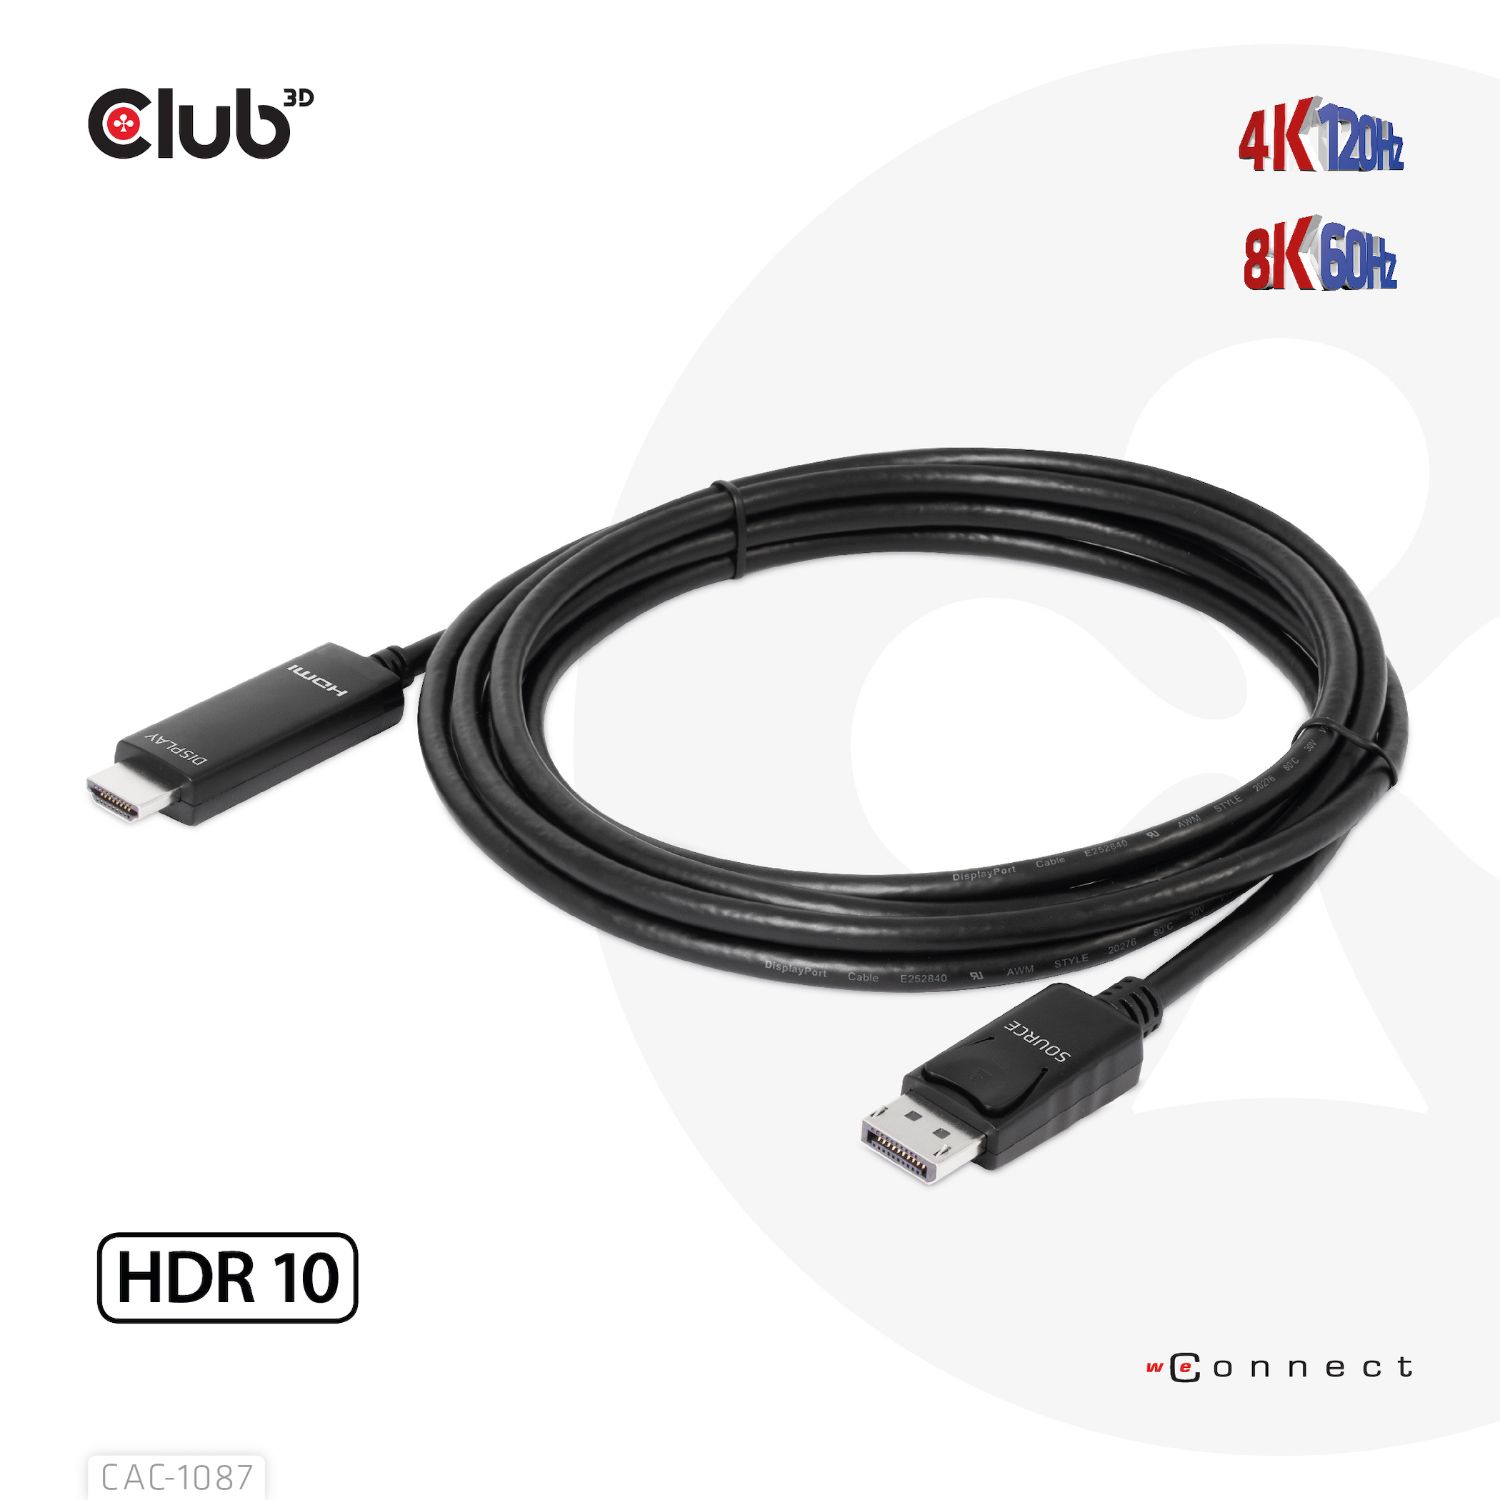 CAC-1087 - Cable Club3D DisplayPort 1.4 a HDMI 4K120Hz or 8K60Hz HDR10 3m (CAC-1087)